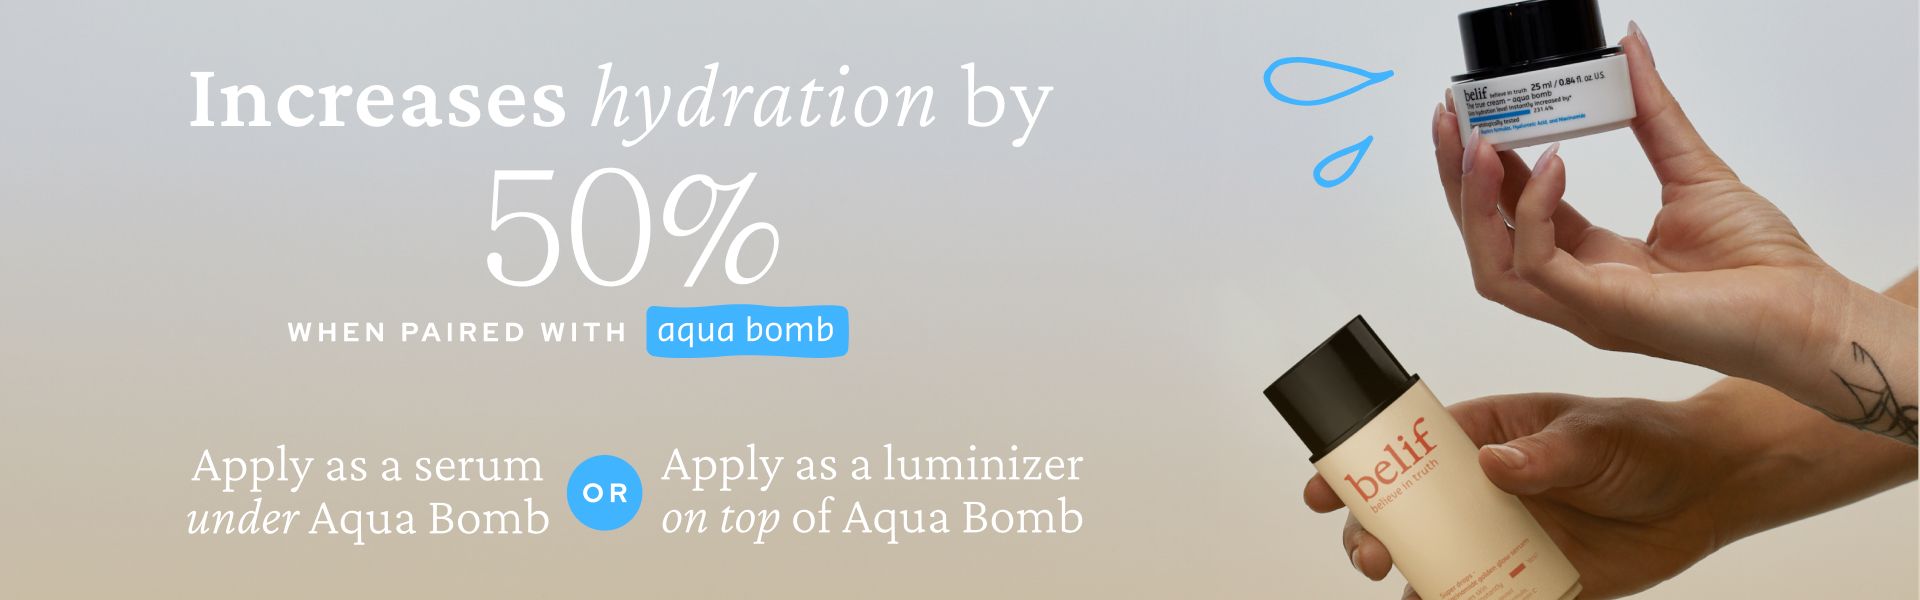 An advertisement showcasing belif moisturizing products against a gradient blue to white background. The text states the products increase hydration by 50% when paired with "Aqua Bomb." A person's hands hold two products: belif Aqua Bomb and belif Gow Serum